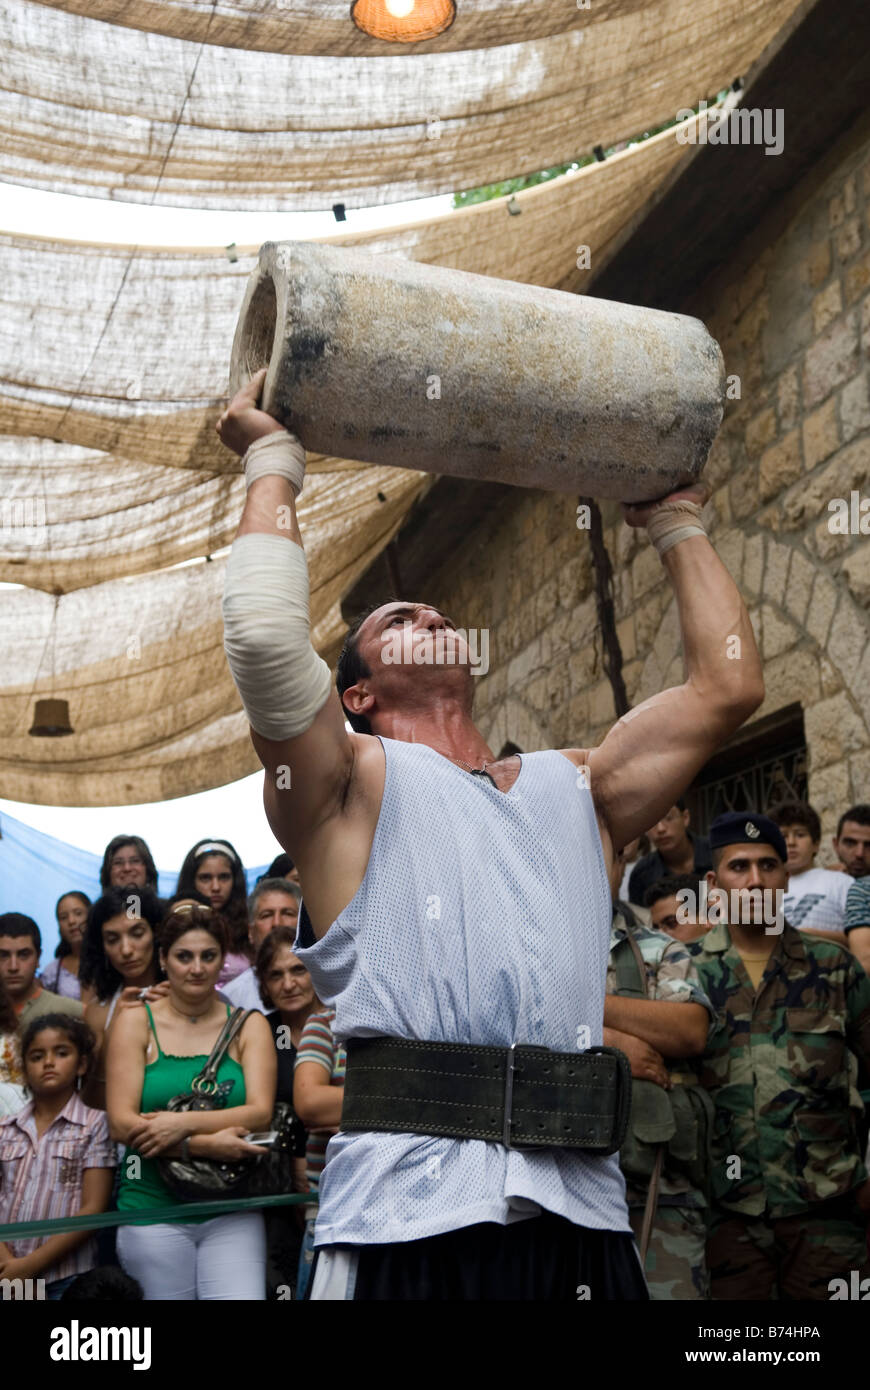 Strong man lifting heavy stone Lebanon Middle East Stock Photo